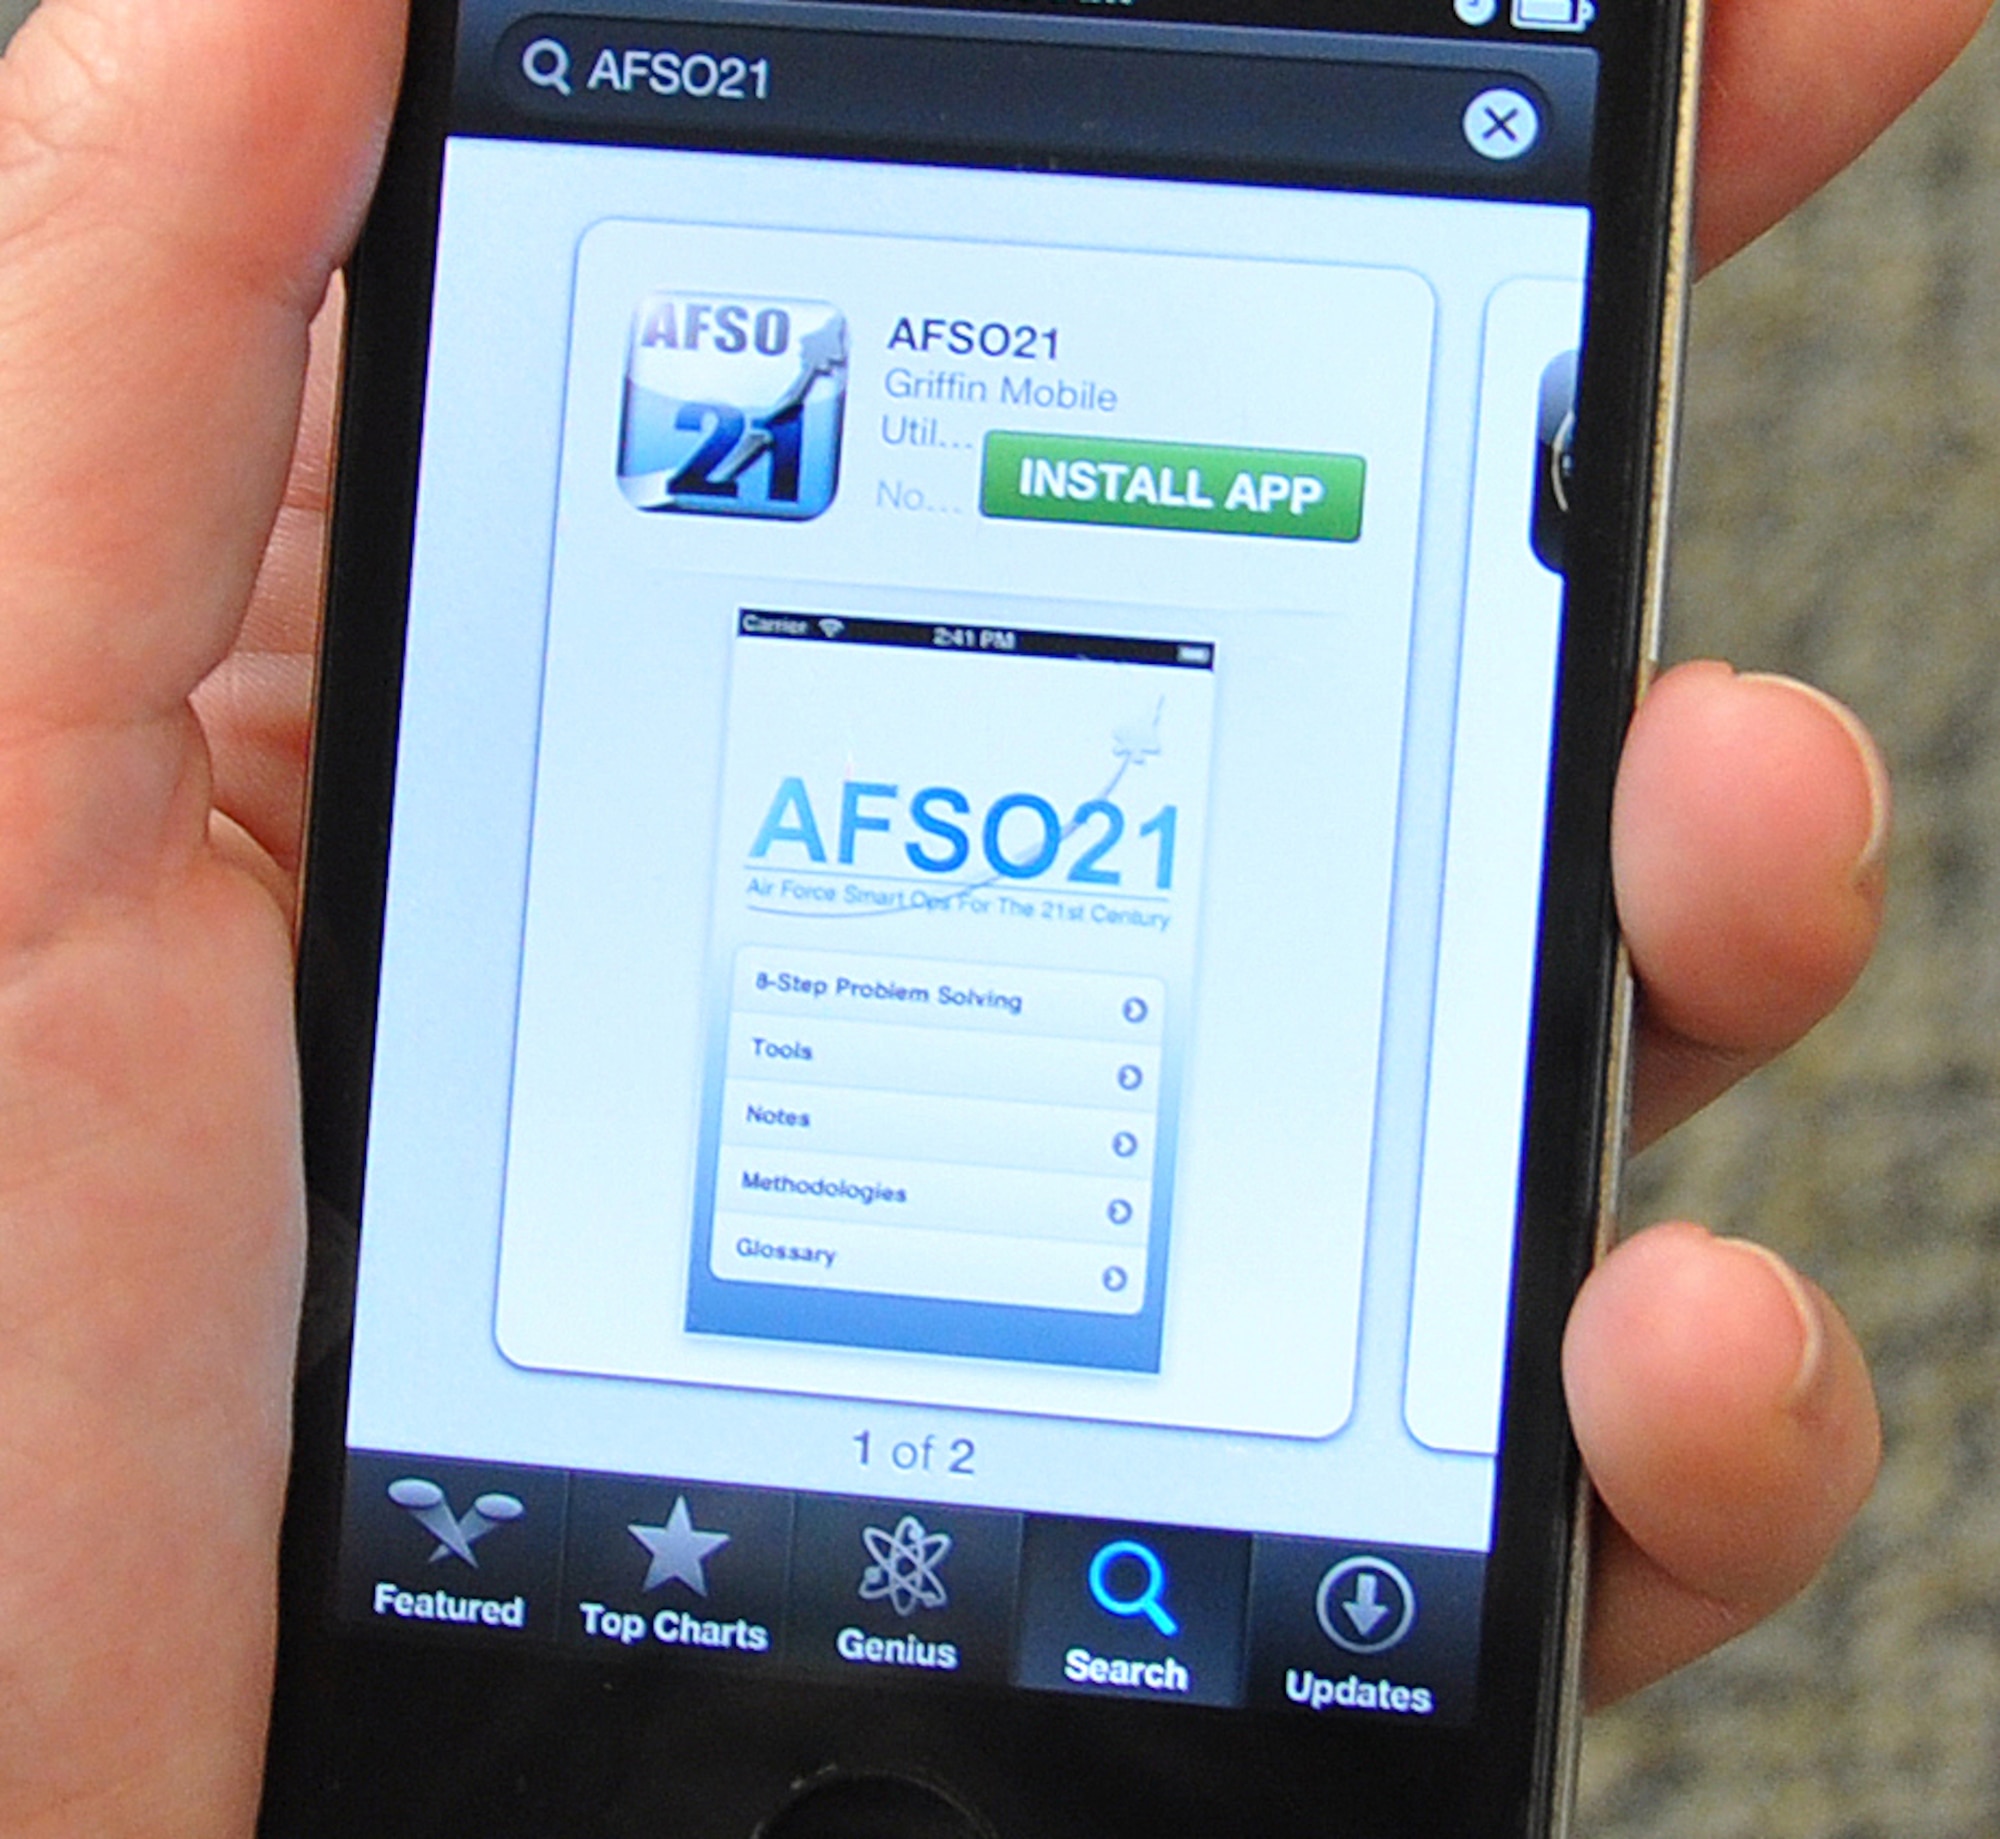 Airmen can now download an Air Force mobile application designed to help them better get at the root of workplace problems. The AFSO21 application, available for free download from the two most popular mobile marketplaces, provides a breakdown of problem solving steps with common tools and a rubric for each step.